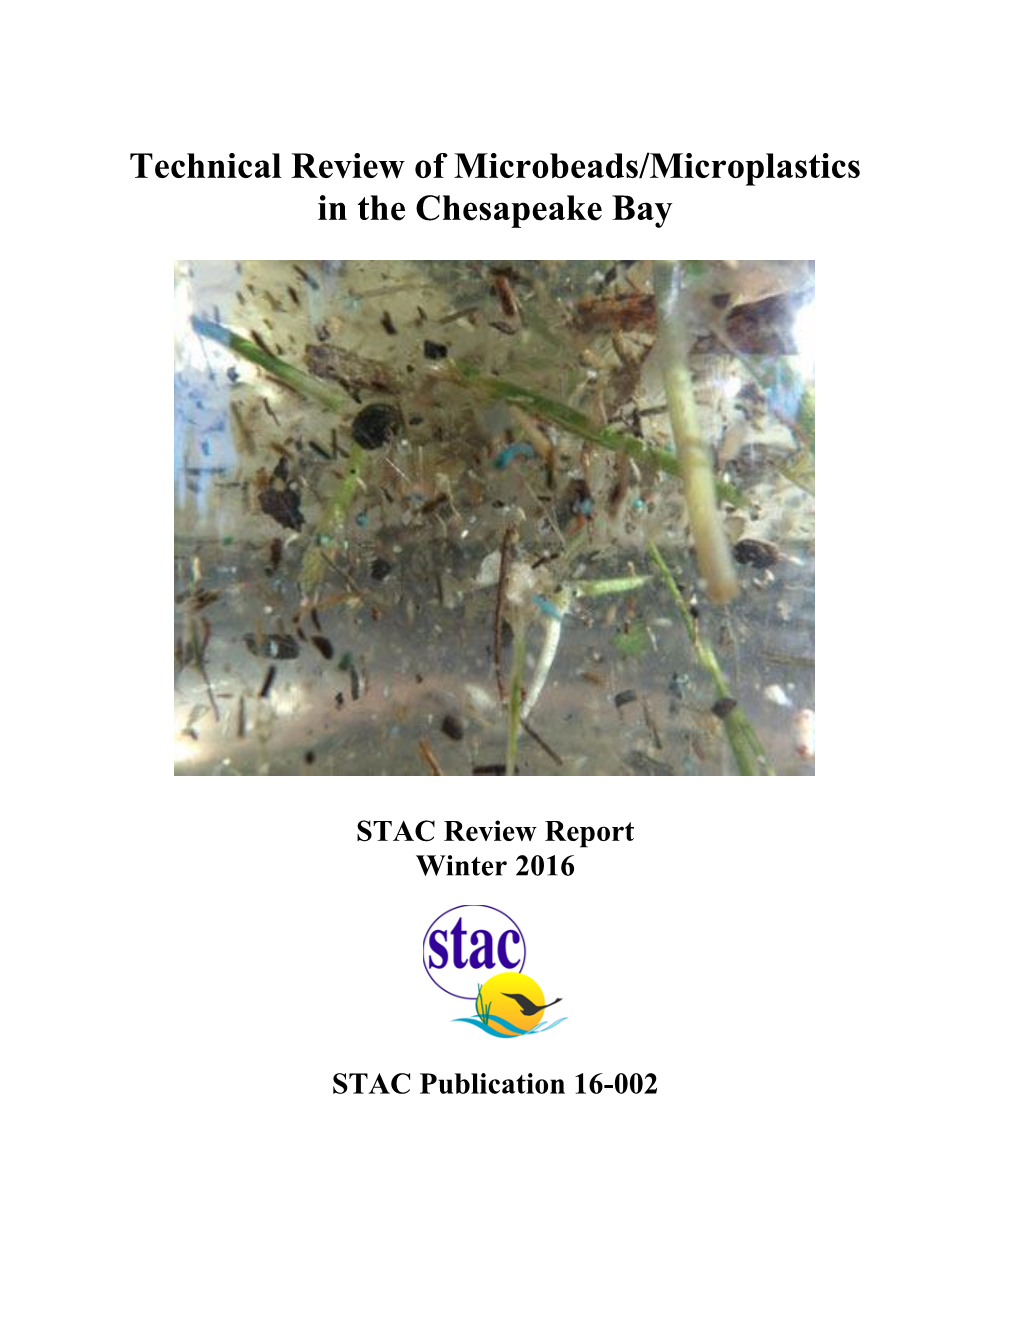 Technical Review of Microbeads/Microplastics in the Chesapeake Bay